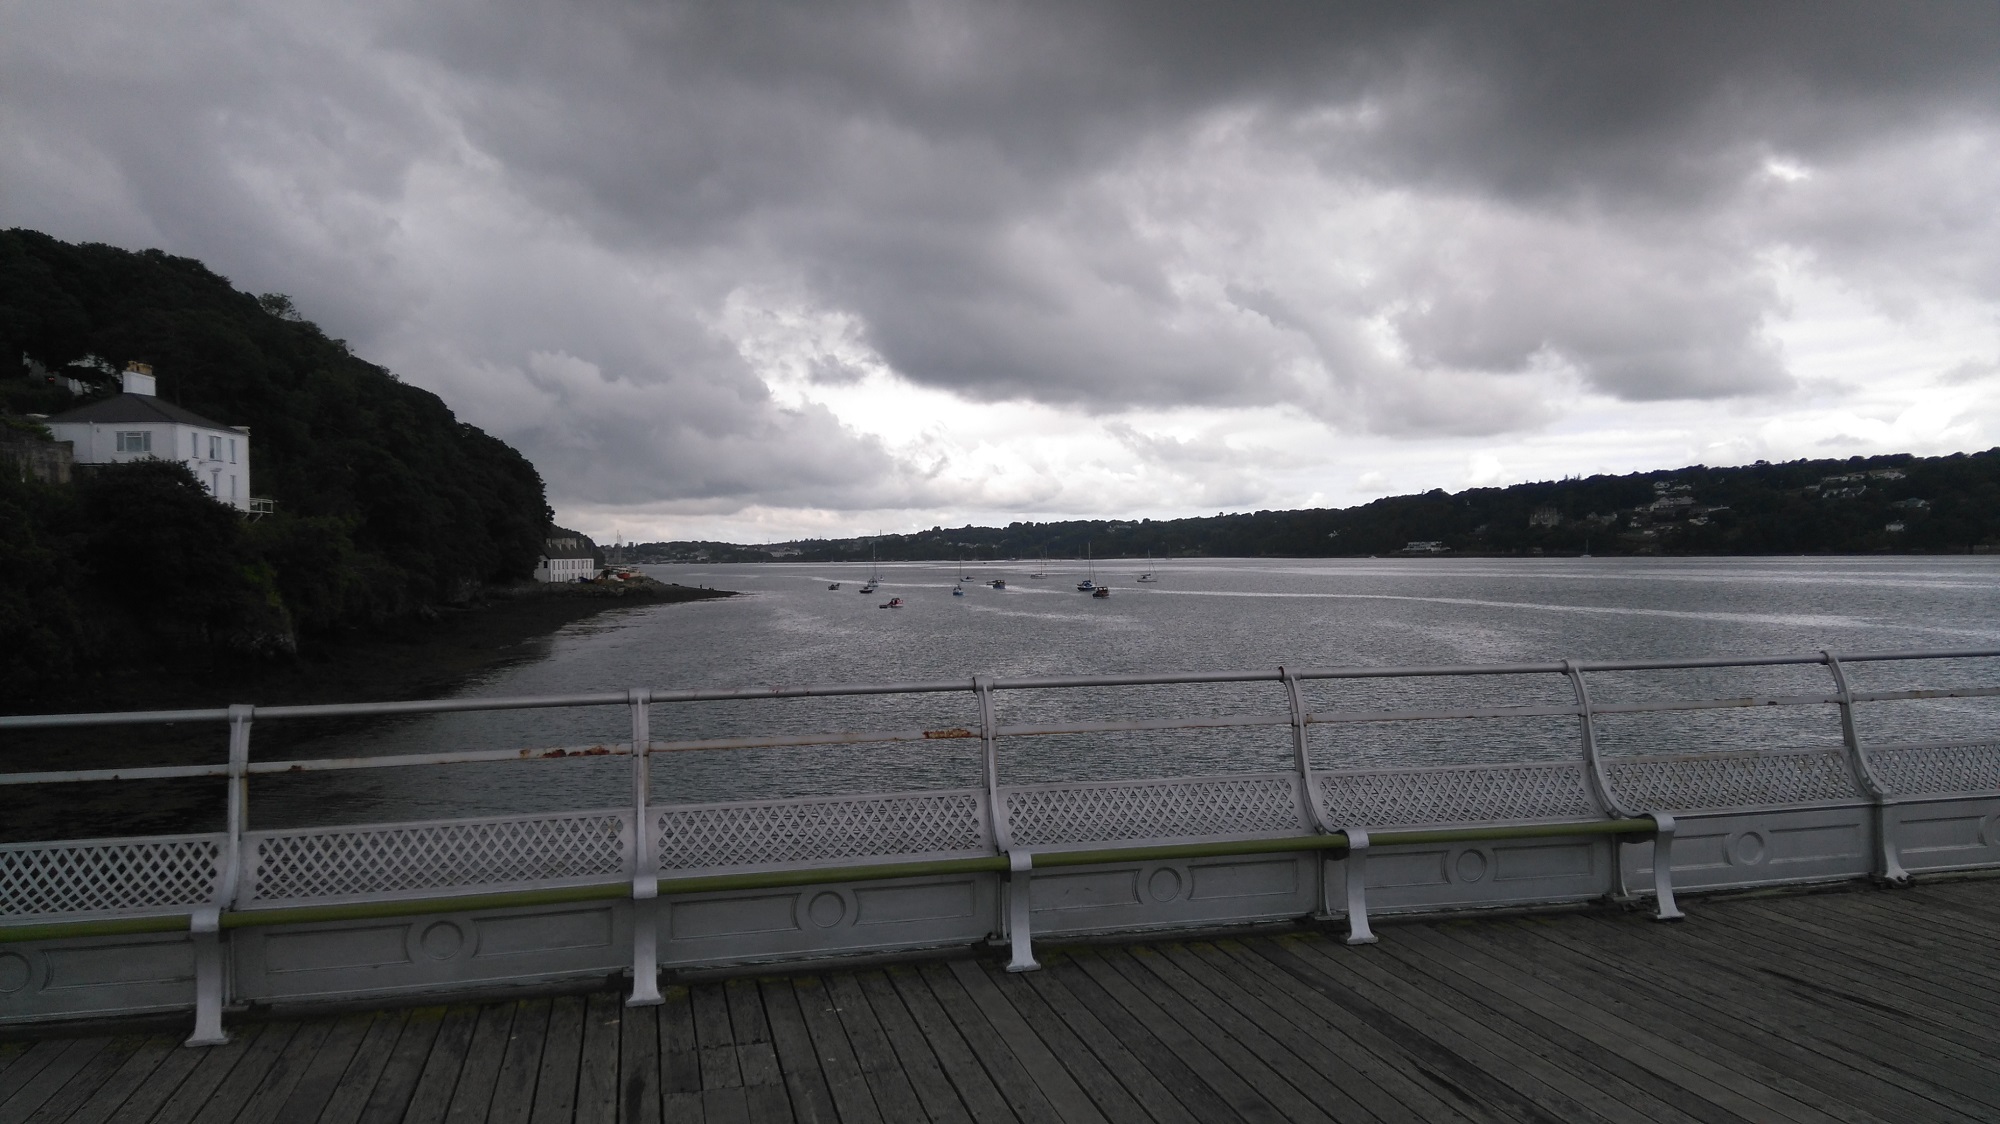 Looking west over Menai Strait from Bangor Pier on a cloudy afternoon.